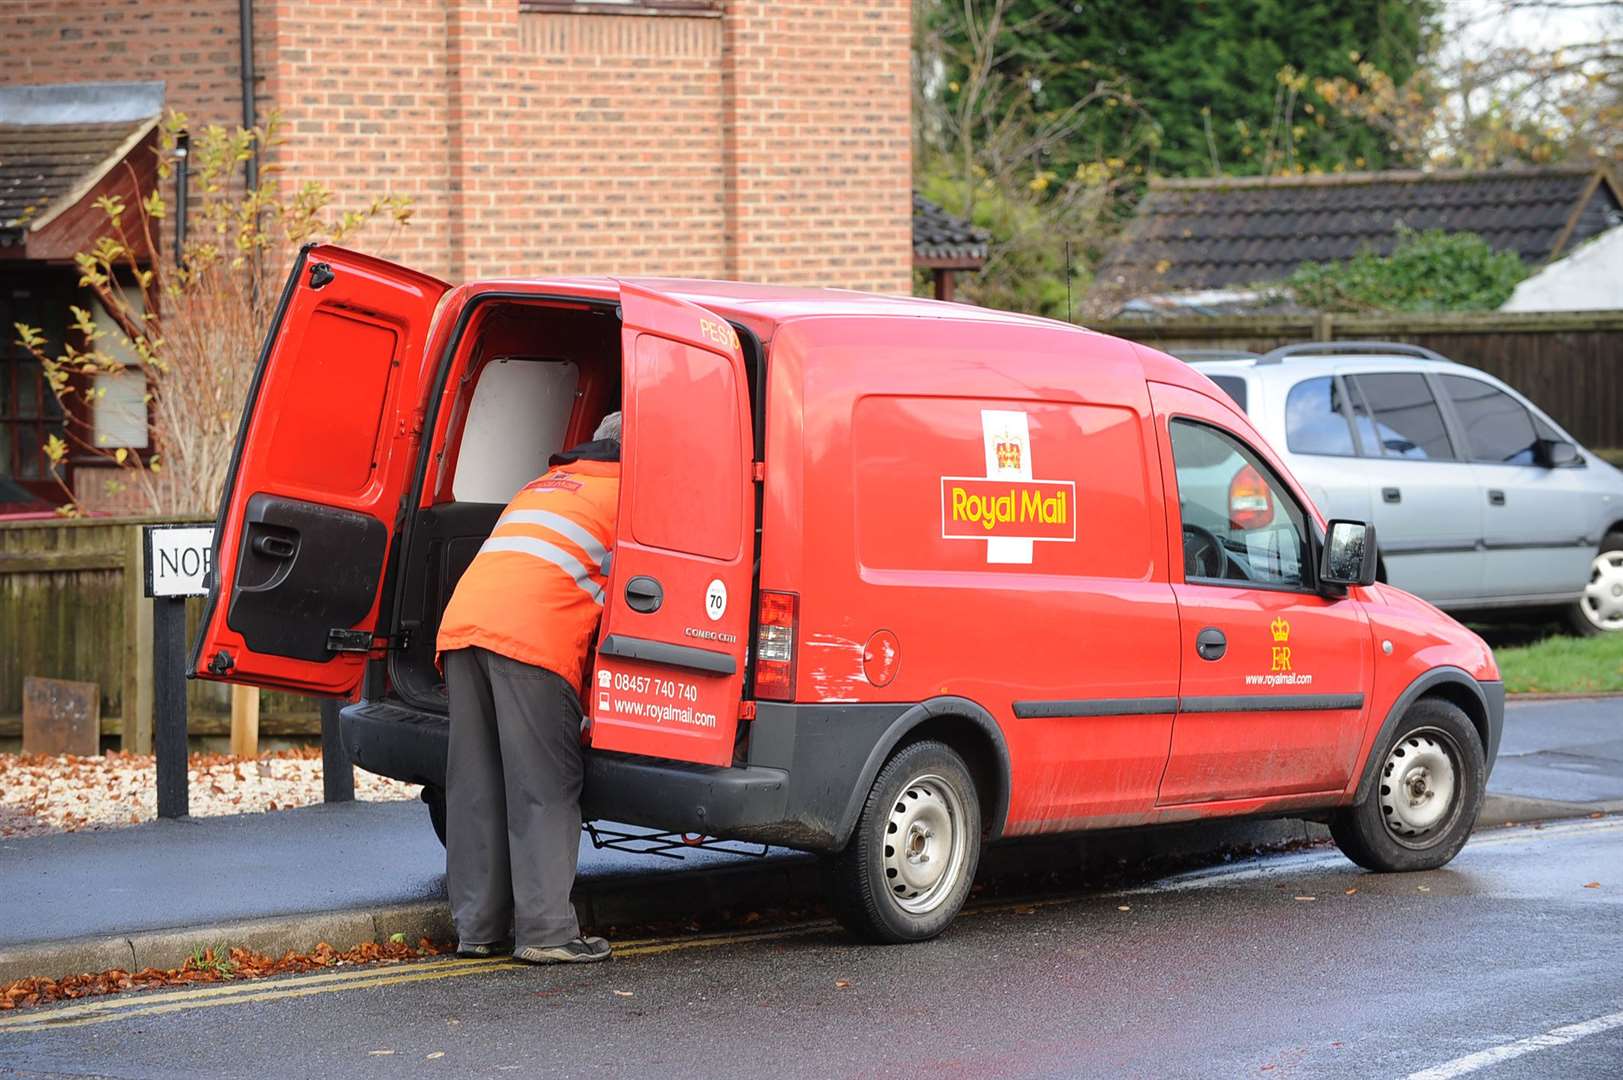 Text messages and emails posing as Royal Mail have also been circulating this year asking people to pay a fee in order to get a parcel delivered